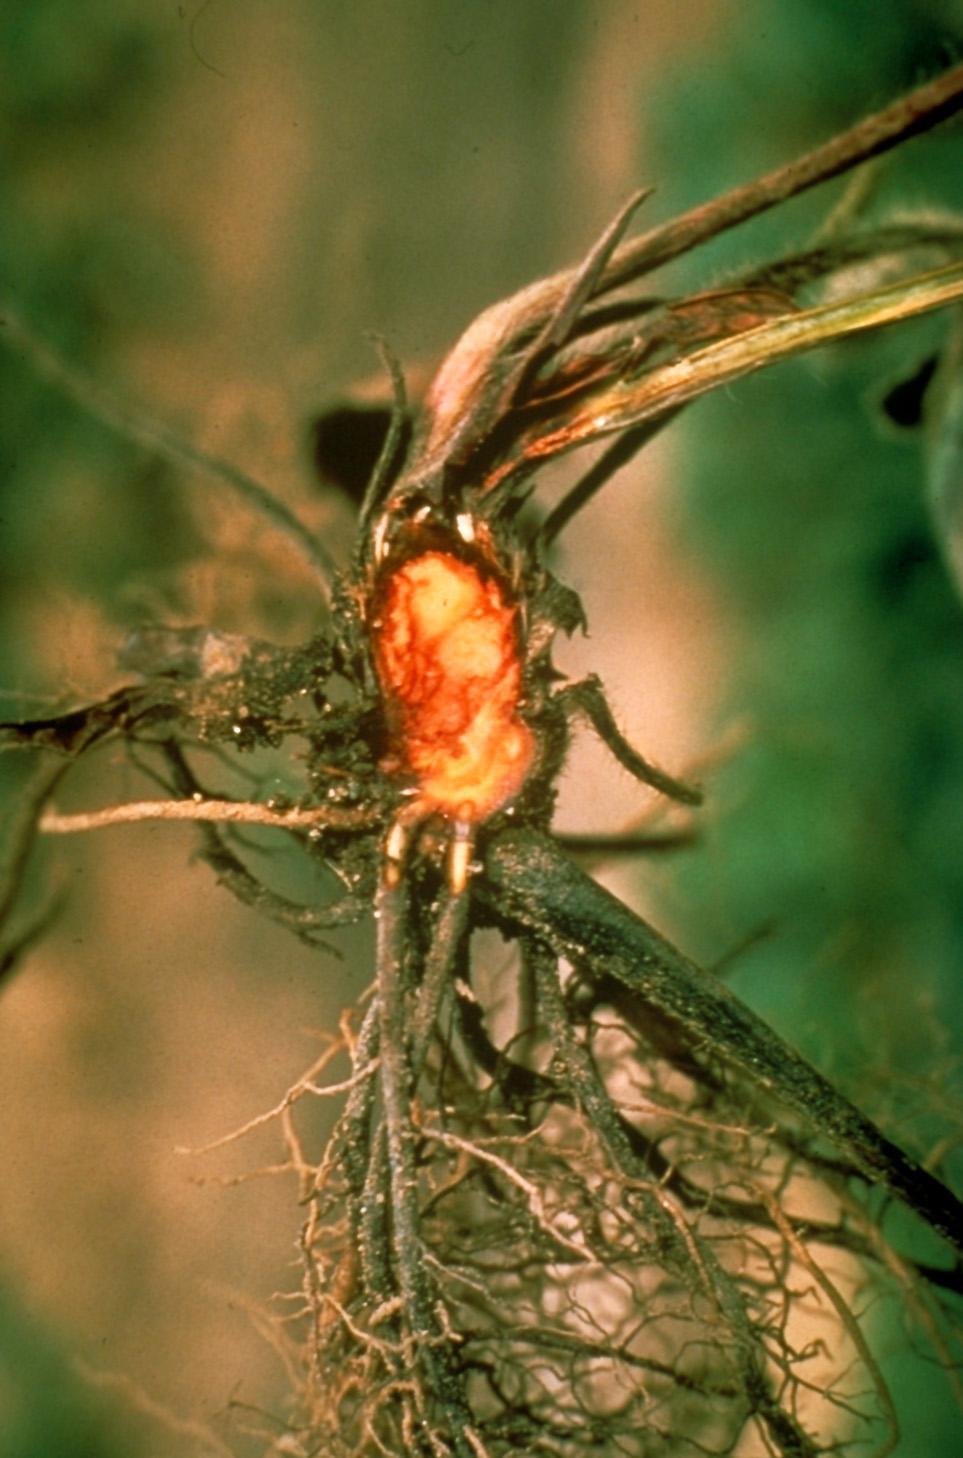 Anthracnose crown rot (Unknown, UKY)